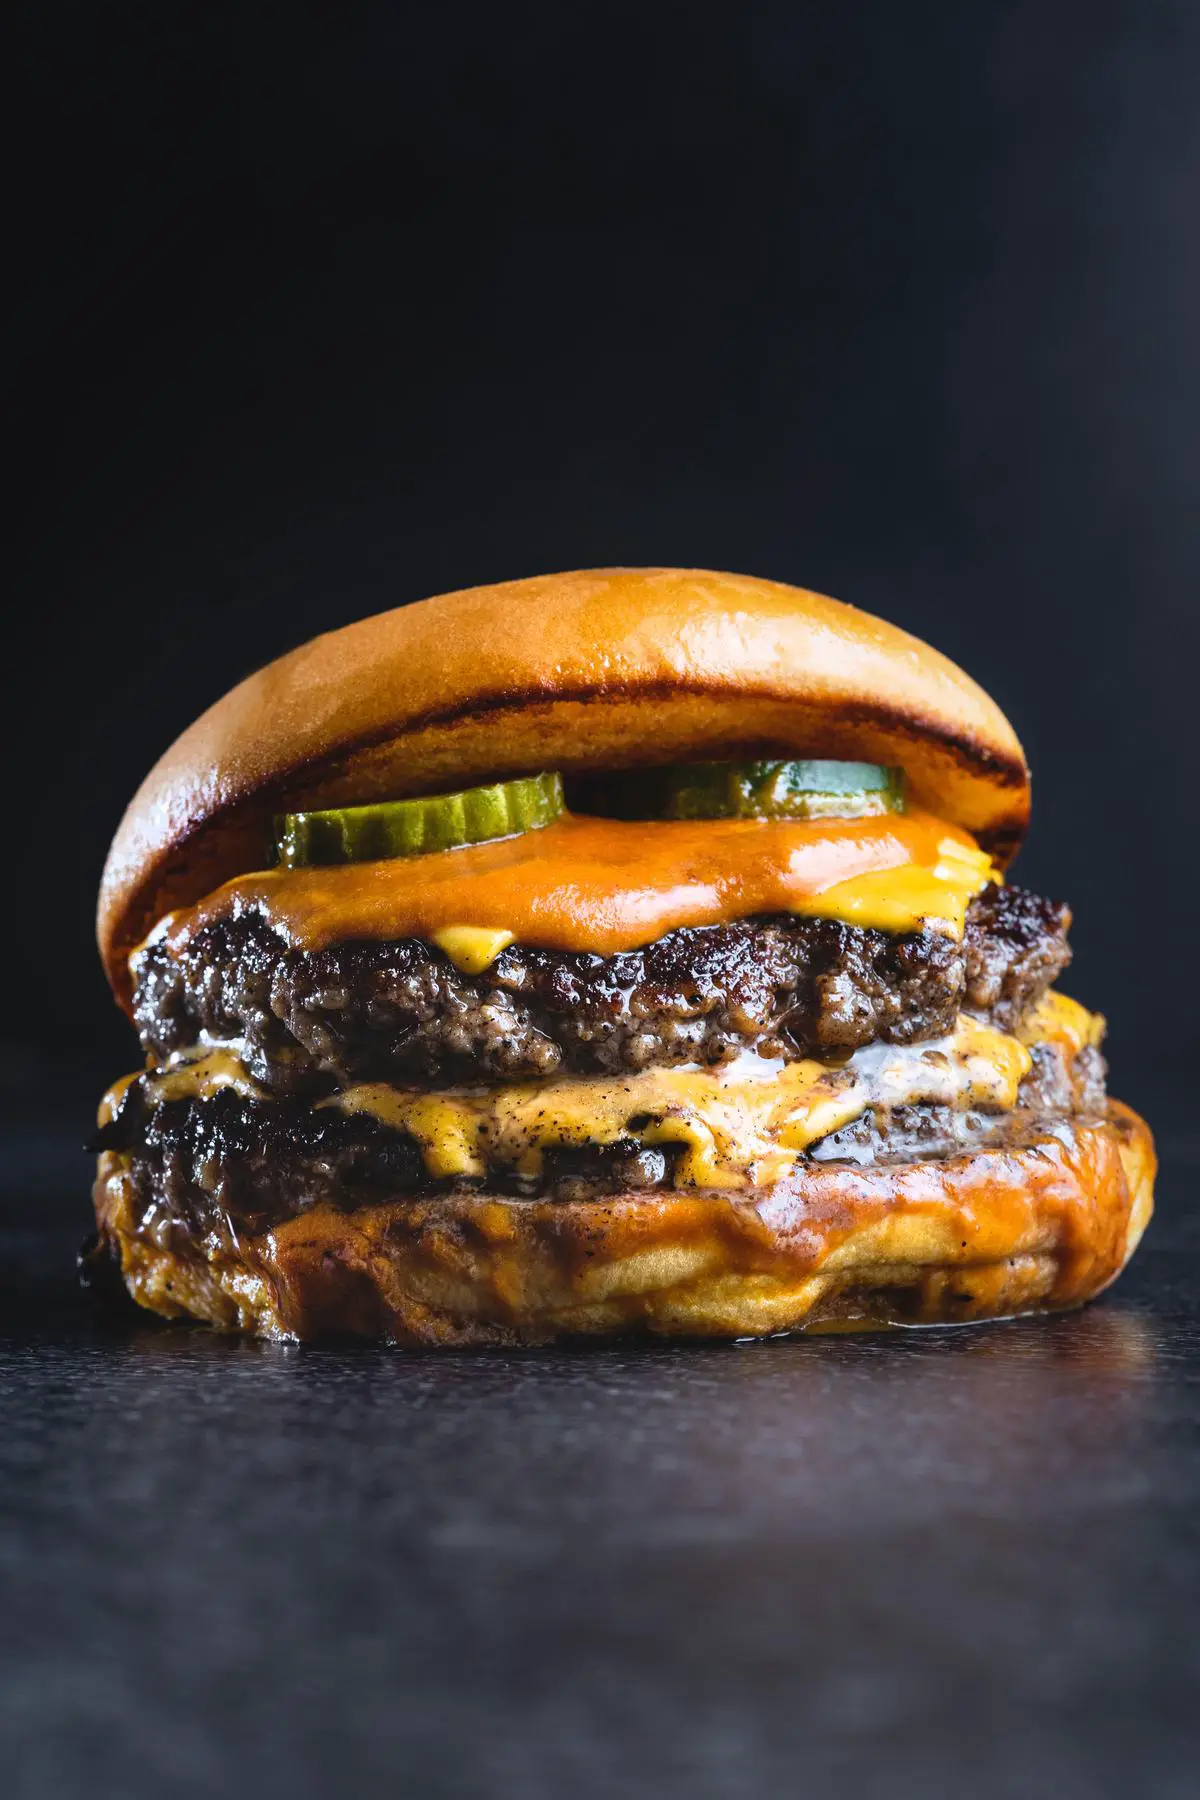 A mouthwatering image of the McCrispy BBQ Smokehouse, filled with flame-grilled patty, cheese, bacon, onions, pickles, mayo, and lettuce. It represents a gourmet burger that showcases a perfect blend of flavors and textures.